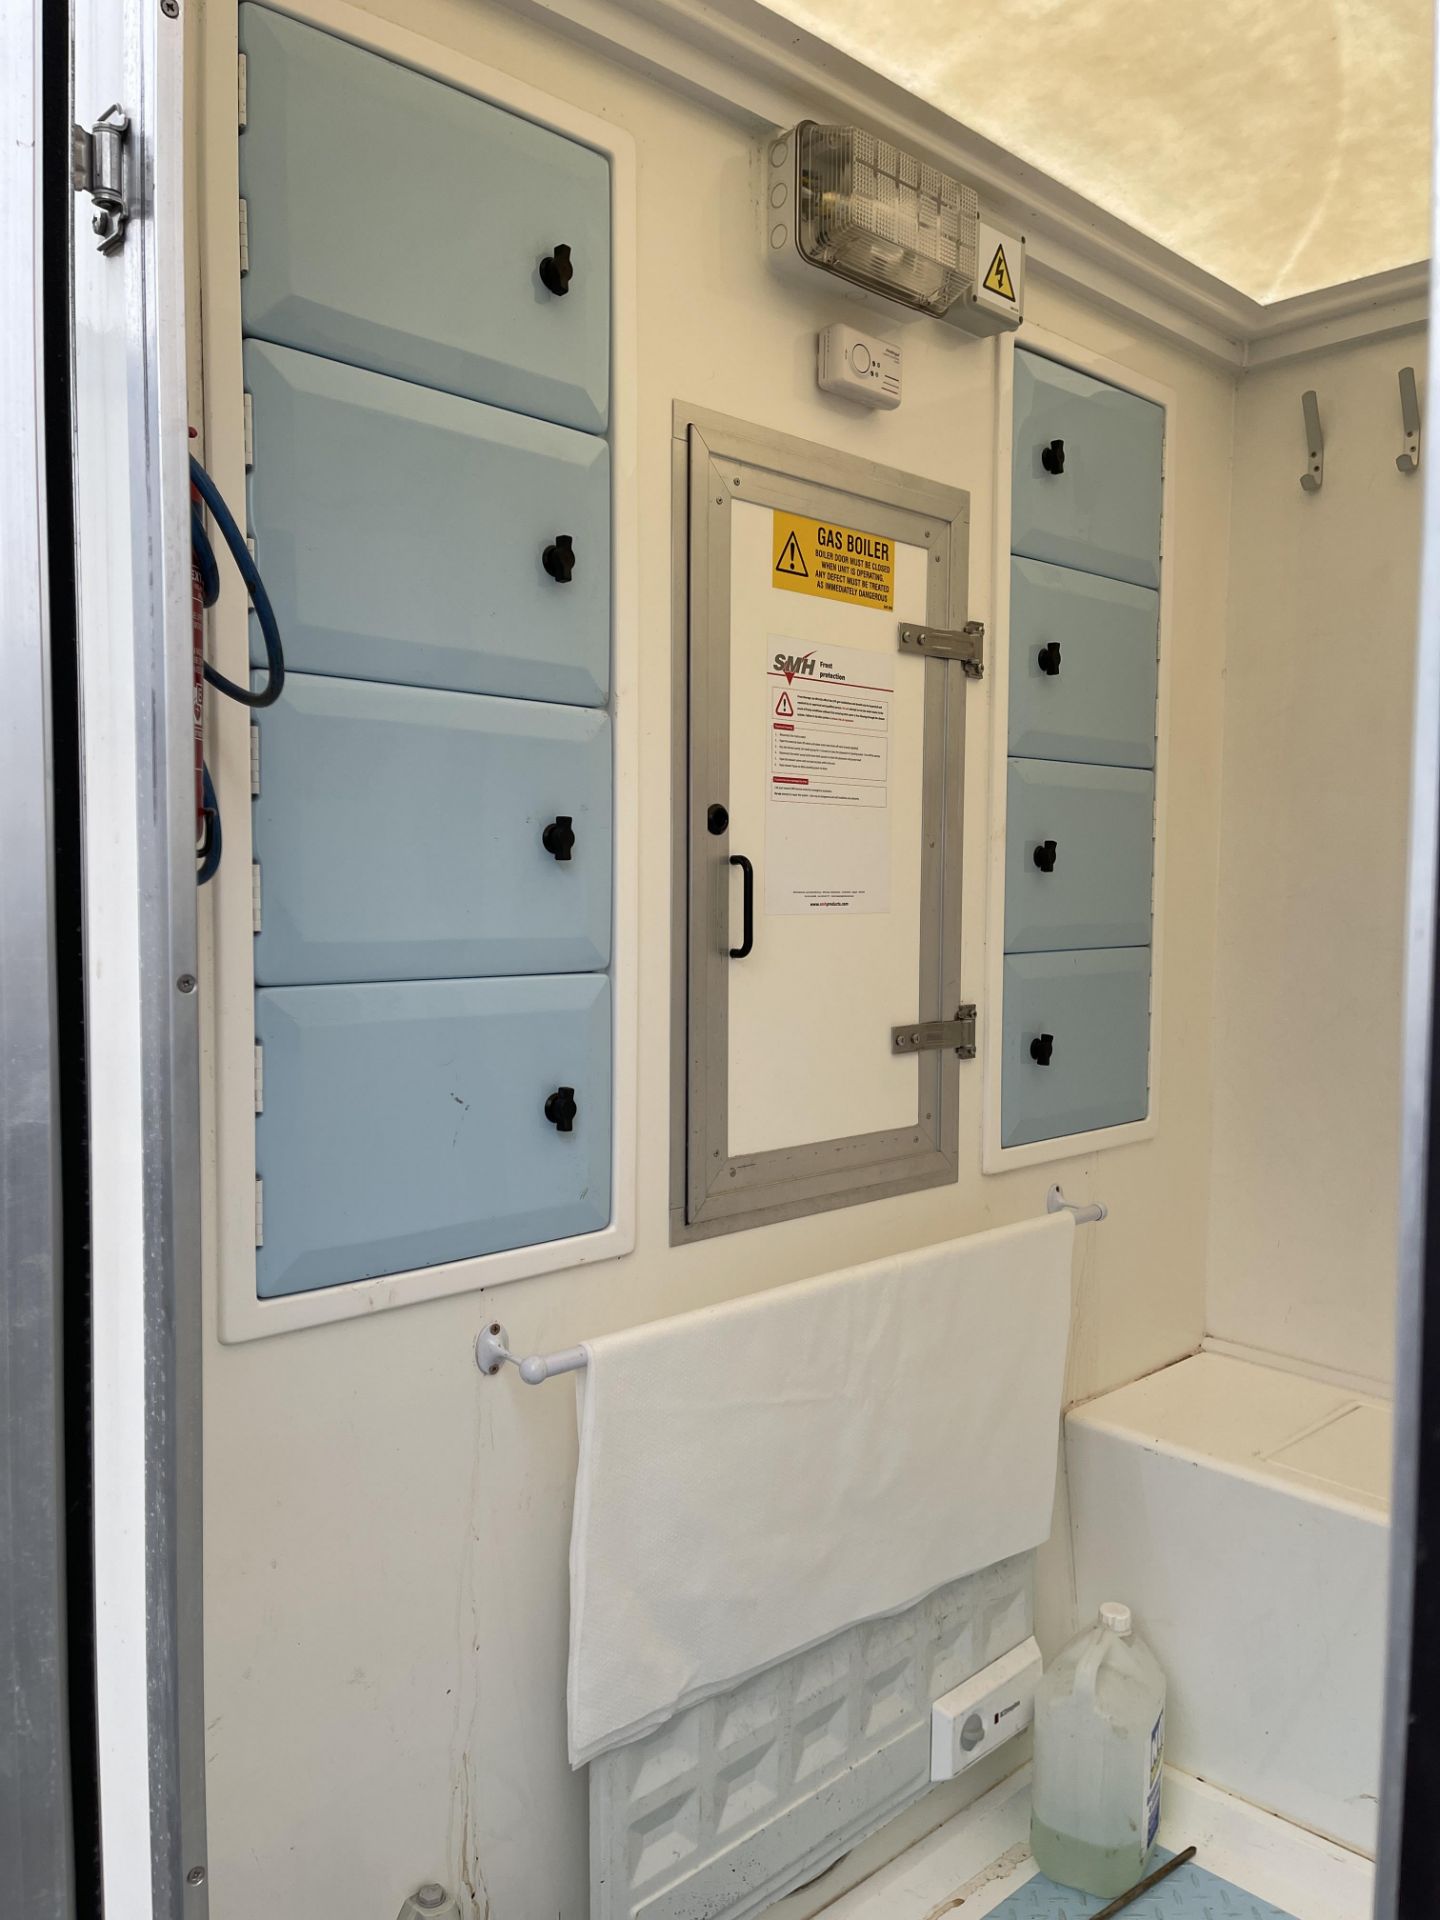 SMH Mobile De-Contamination Unit Comprising Dirty End, Twin Shower Enclosure, Clean End, Fitted with - Image 65 of 74